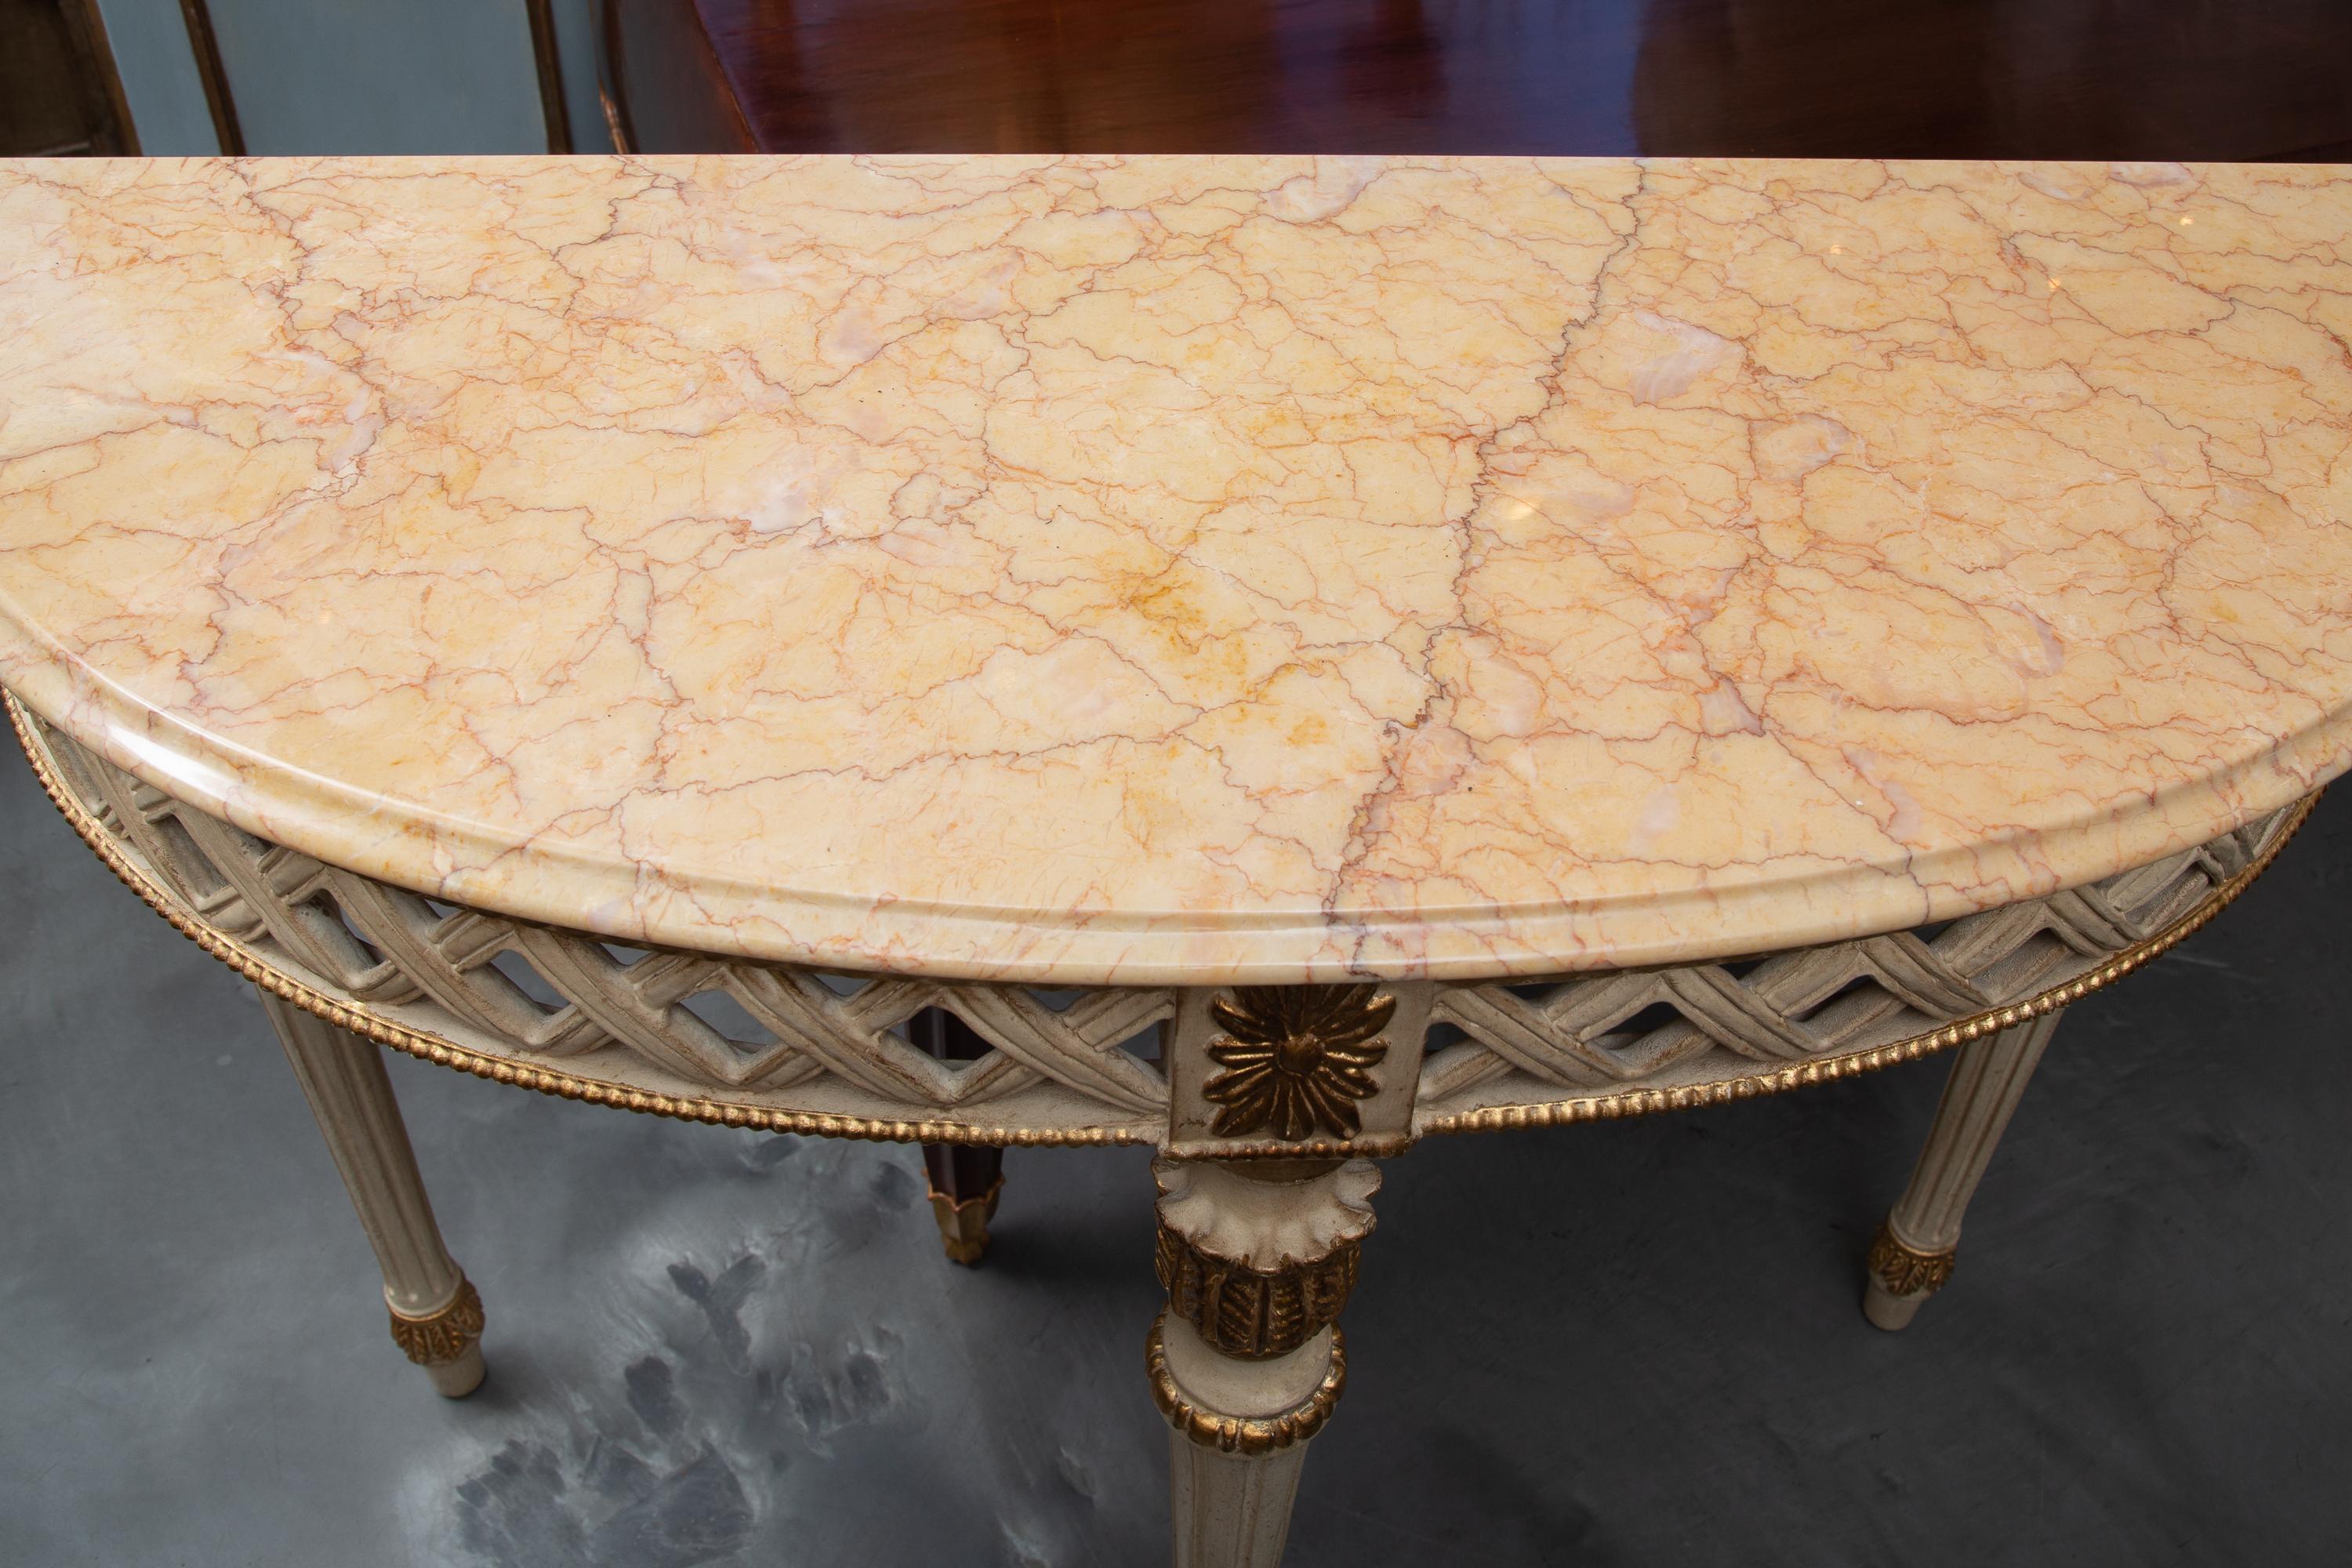 This is a decorative Italian Louis XVI style white painted and parcel gilt demilune console, the sepia variegated marble top with molded edge over lattice-form frieze. The demilune console is supported by round tapering fluted legs. 20th century.